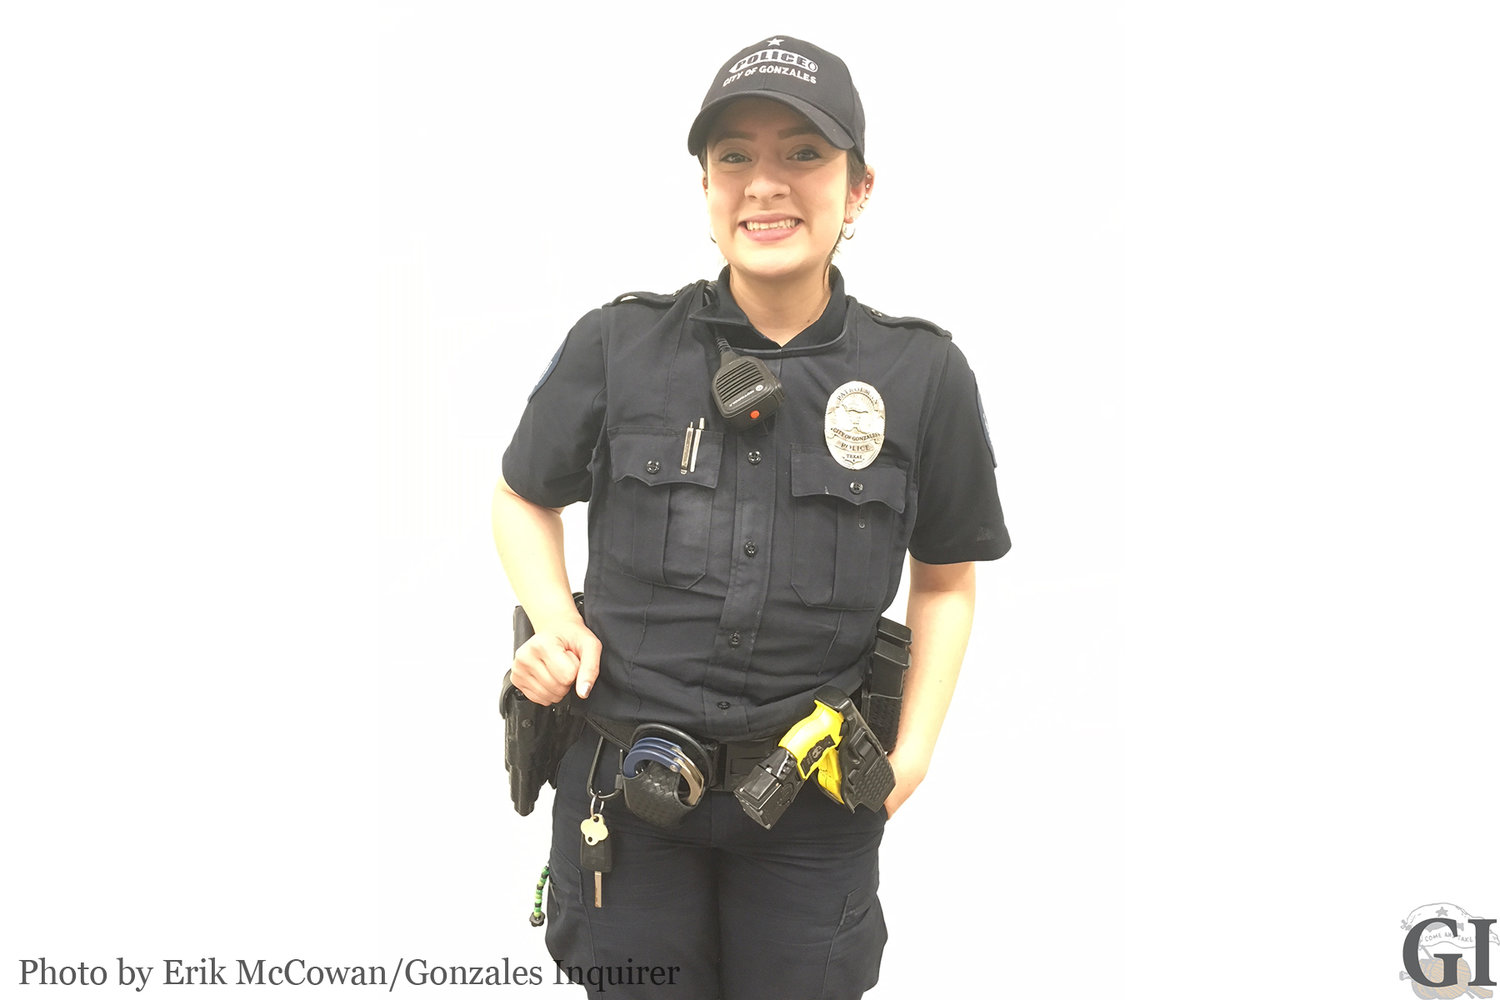 Gonzales Police Department Patrol Officer Marisol Sanchez can belt out quite the tune. But, she didn't realize that a simple guest appearance with a mariachi band would lead to a viral video for the department.